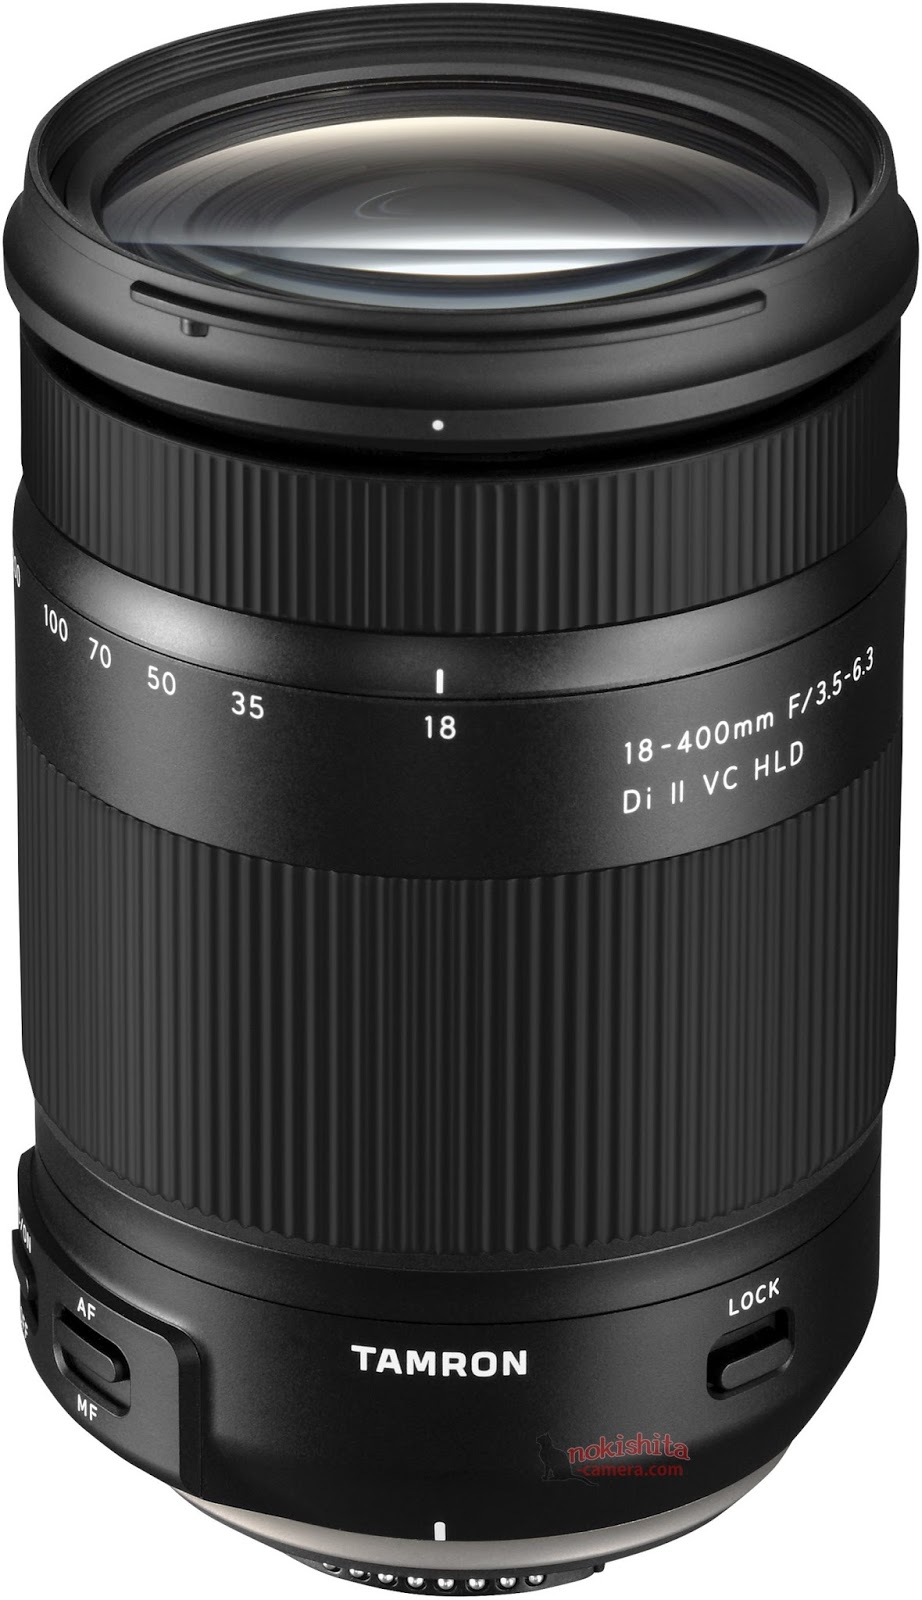 New Tamron 18-400mm f/3.5-6.3 Di II VC HLD lens to be announced soon